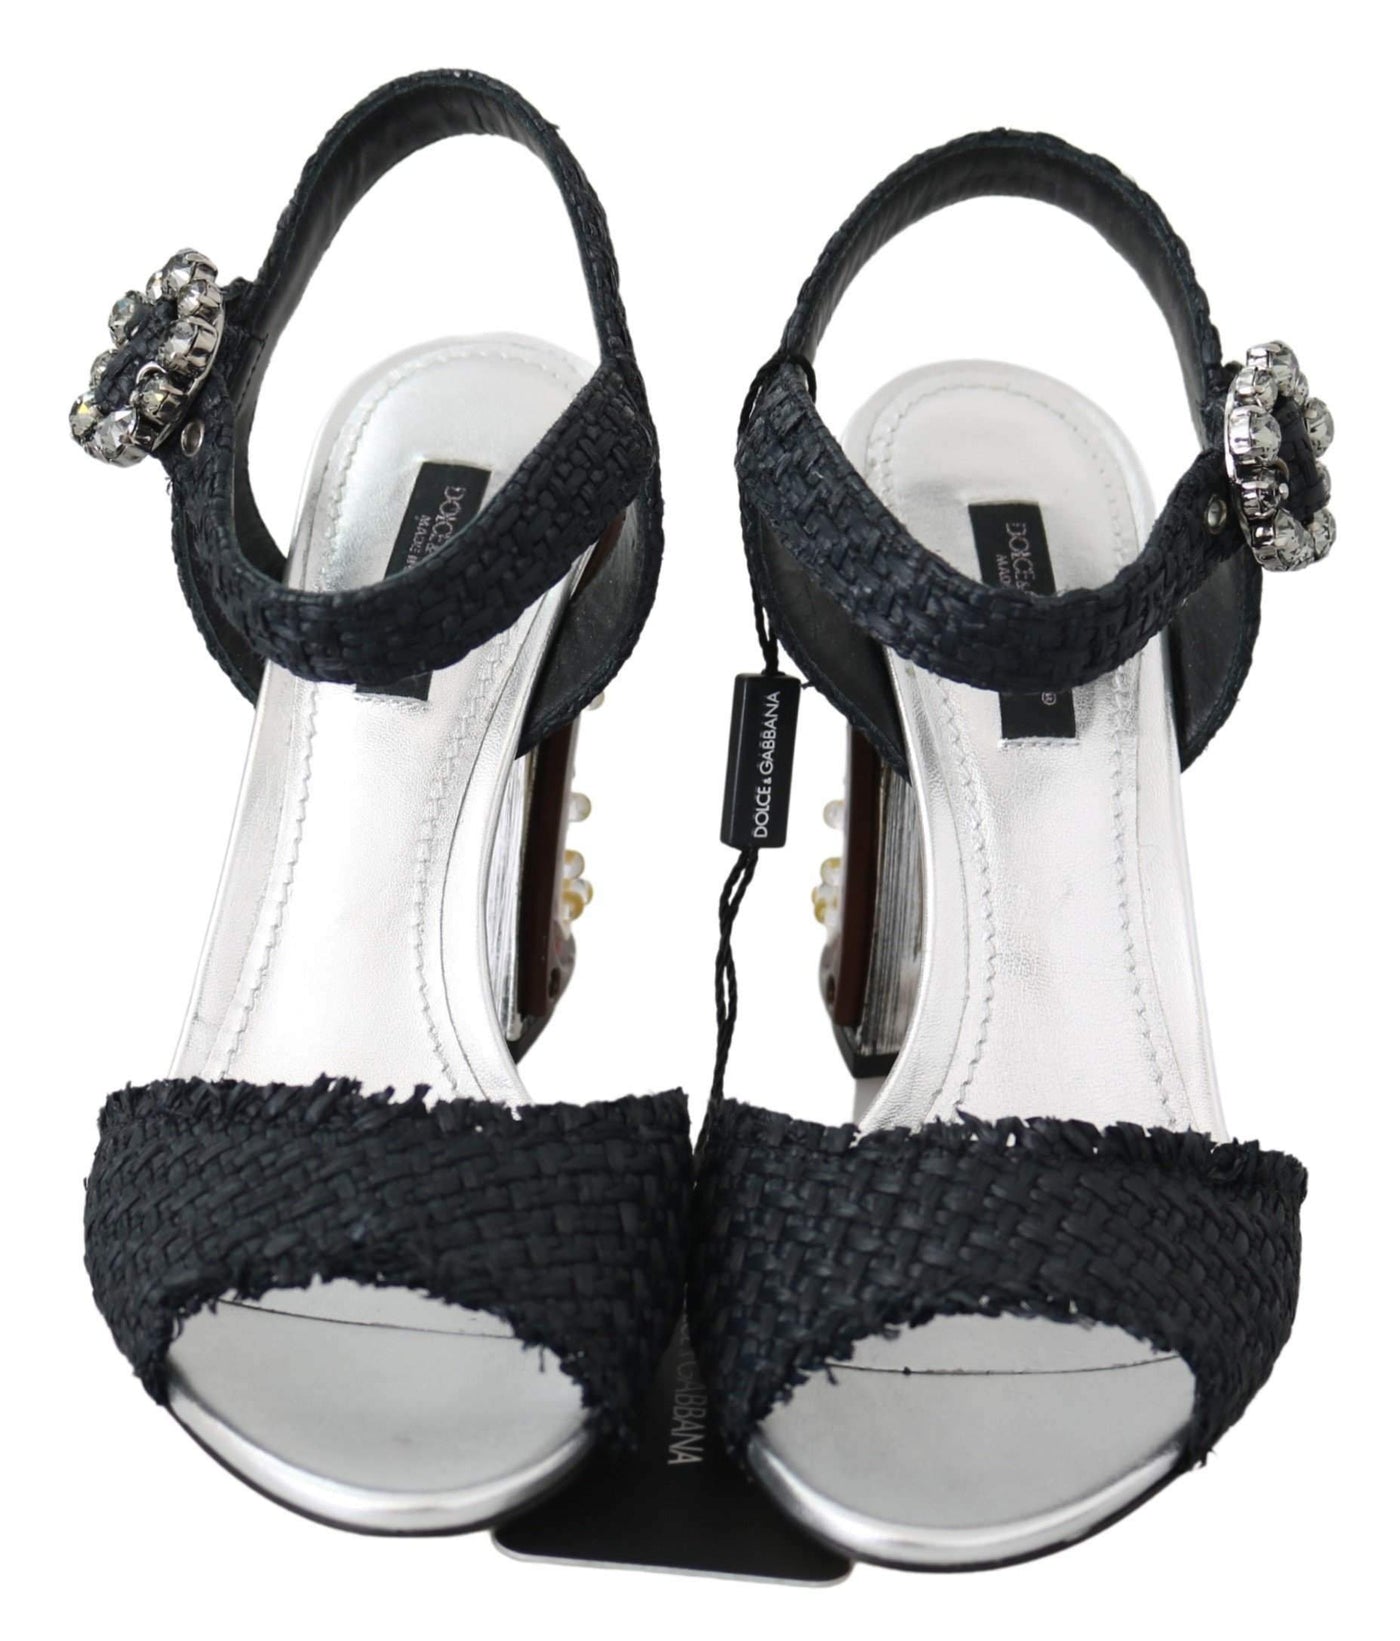 Dolce & Gabbana Black Crystals LED LIGHTS Sandals Shoes #women, Black, Brand_Dolce & Gabbana, Dolce & Gabbana, EU36/US5.5, feed-agegroup-adult, feed-color-black, feed-gender-female, feed-size-US5.5, Gender_Women, Sandals - Women - Shoes, Shoes - New Arrivals at SEYMAYKA